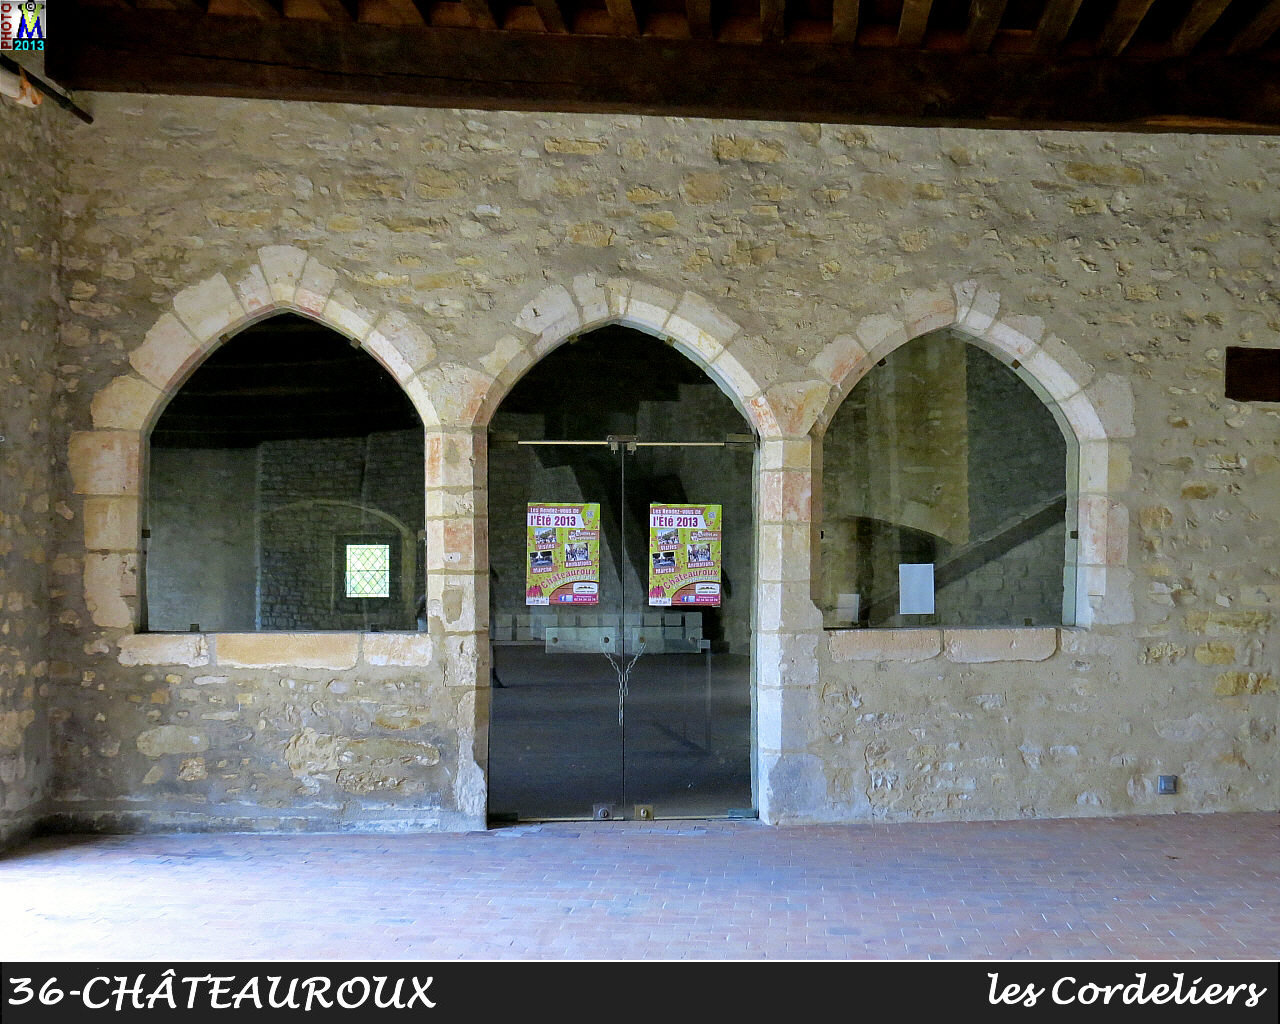 36CHATEAUROUX_cordeliers_108.jpg